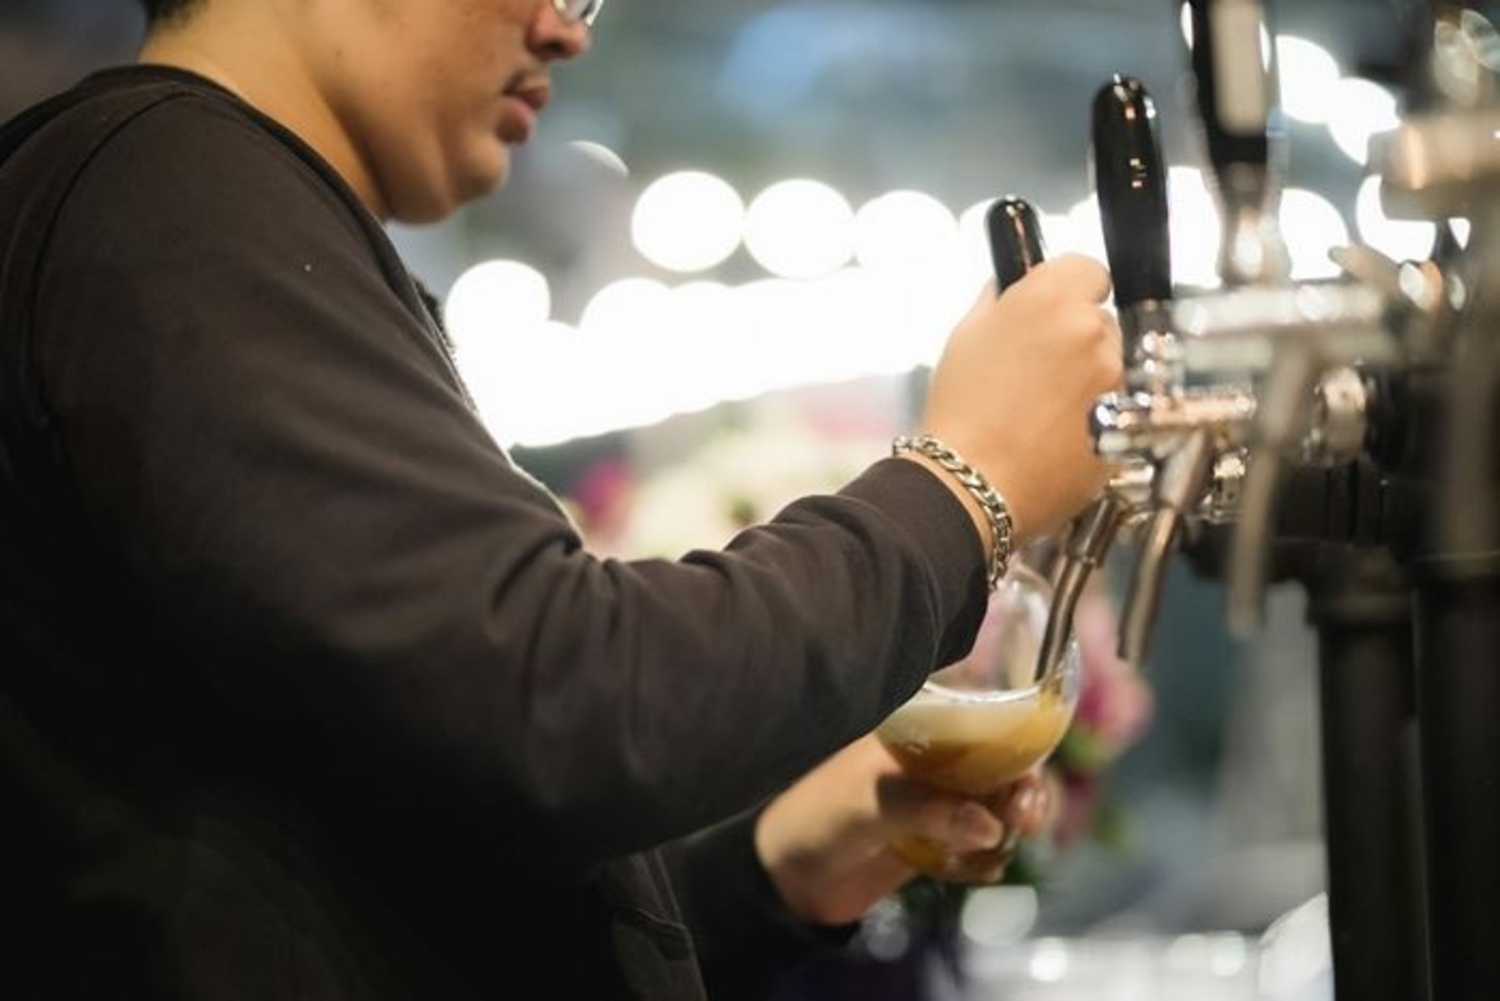 Court Fines Man $4000.00 Over Craft Beer Review on Facebook in Thailand, craft breweries